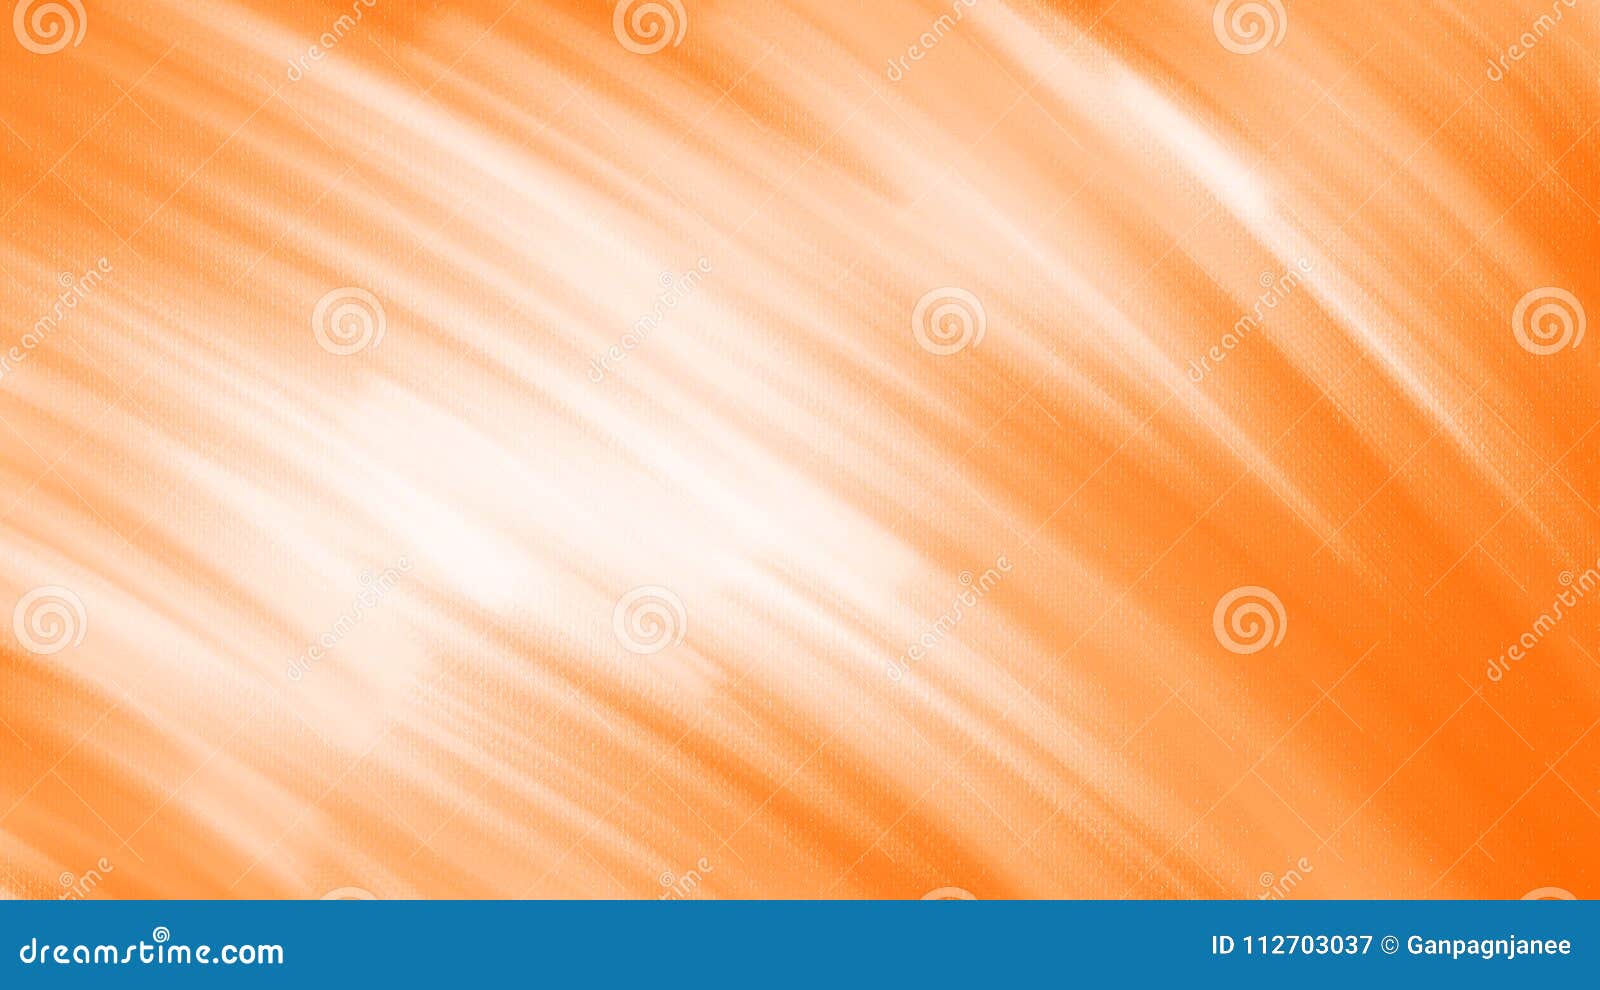 Orange Abstract Oil Painting On Canvas Background Wallpaper Art